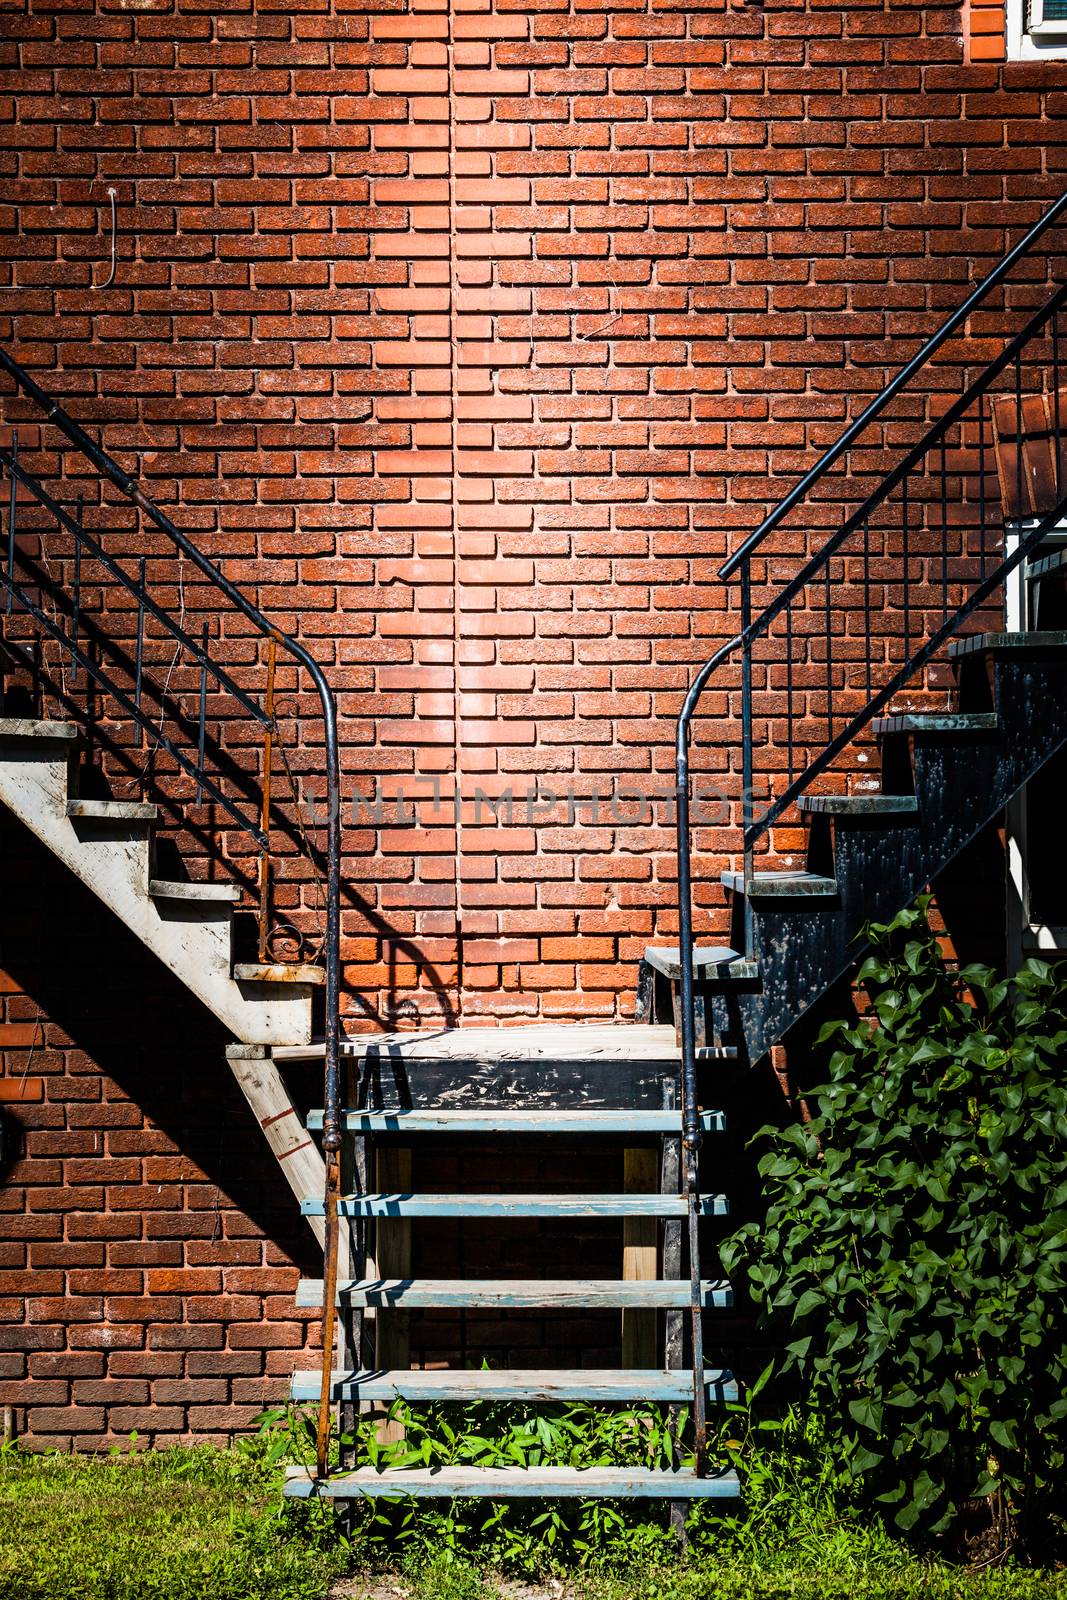 Symmetrical Staircases merging together and brick wall